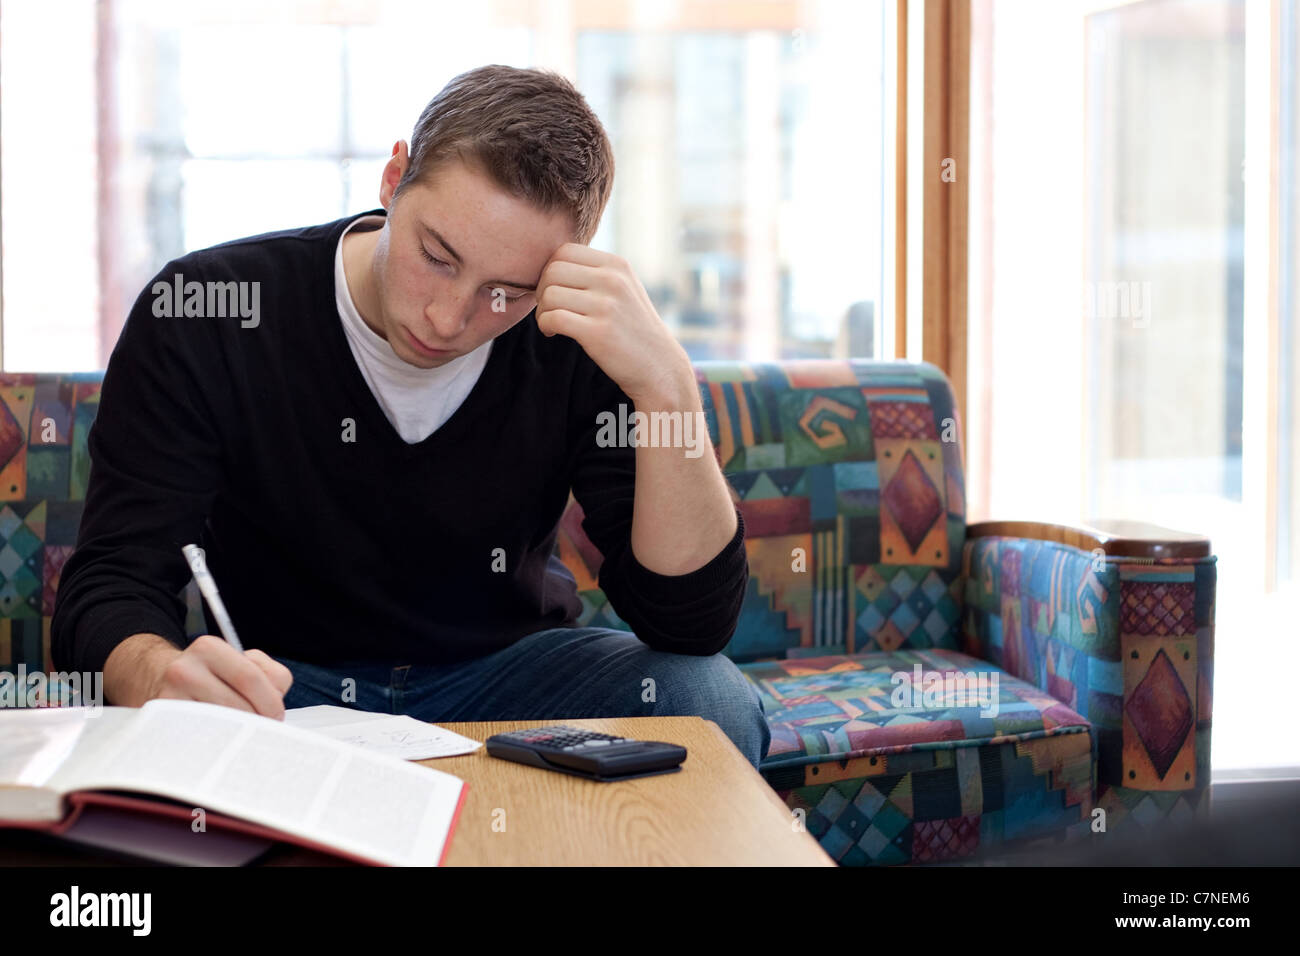 A young college student cramming before his final exams. Stock Photo